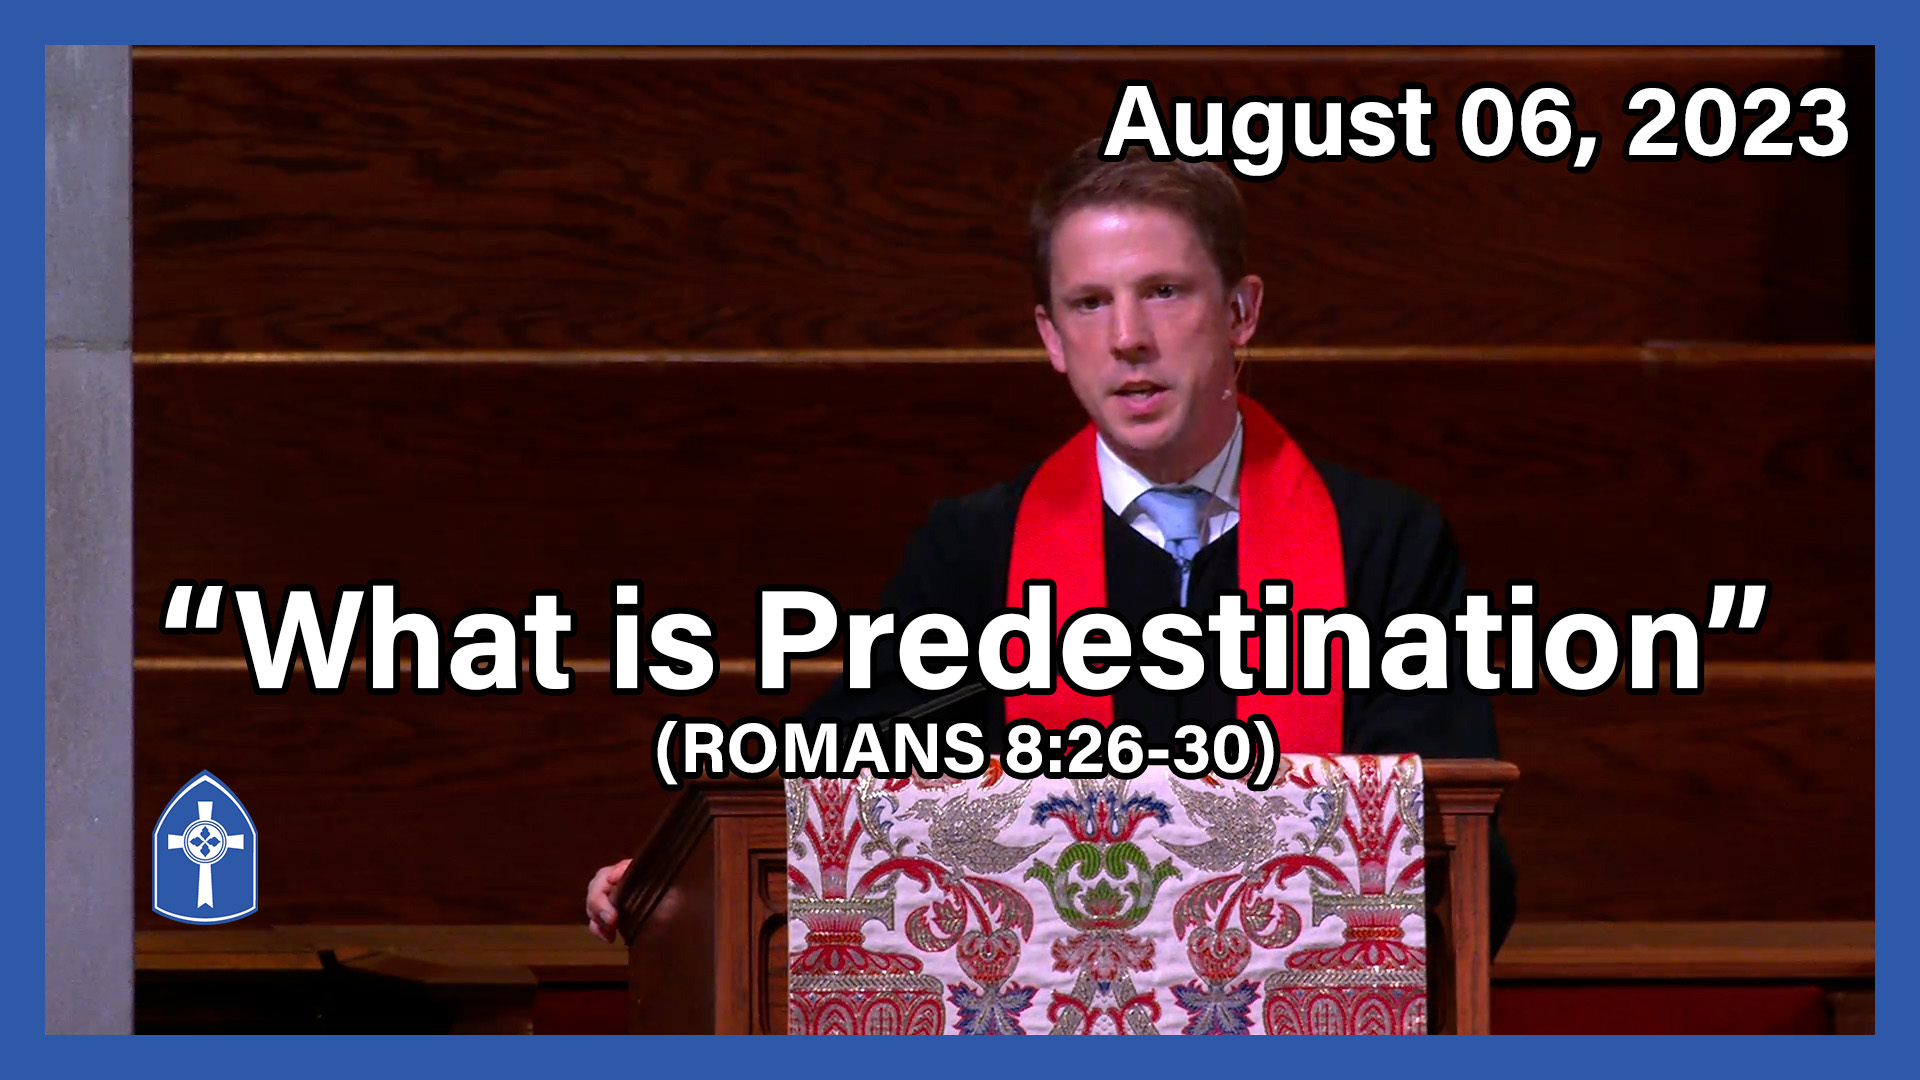 August 06 - What is Predestination?